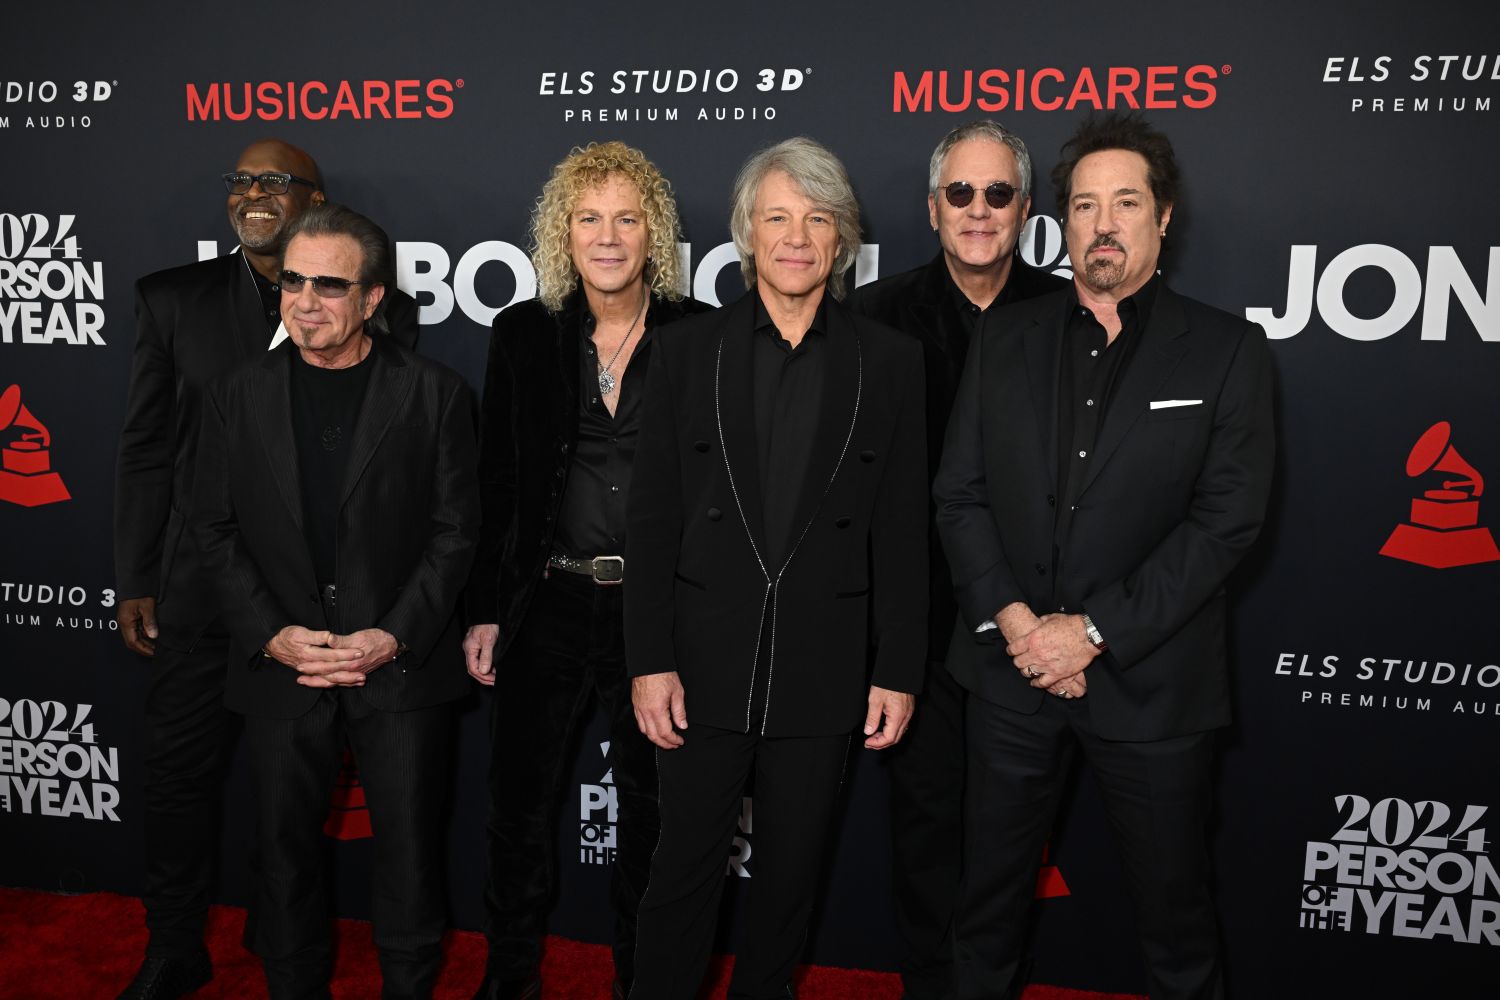 <p>Bon Jovi was founded in 1983 in Sayerville, NJ, and was comprised of Jon Bon Jovi (frontman, lead songwriter, vocals, and guitar), <a href="https://www.sheknows.com/tags/richie-sambora/">Richie Sambora</a> (songwriter and guitar), Tico Torres (drums), Alec John Such and later Hugh McDonald (bass), and David Bryan (keyboards and cascading curls).</p> <p>The band soon found unparalleled success by blending hard rock with undeniable pop hooks.</p>